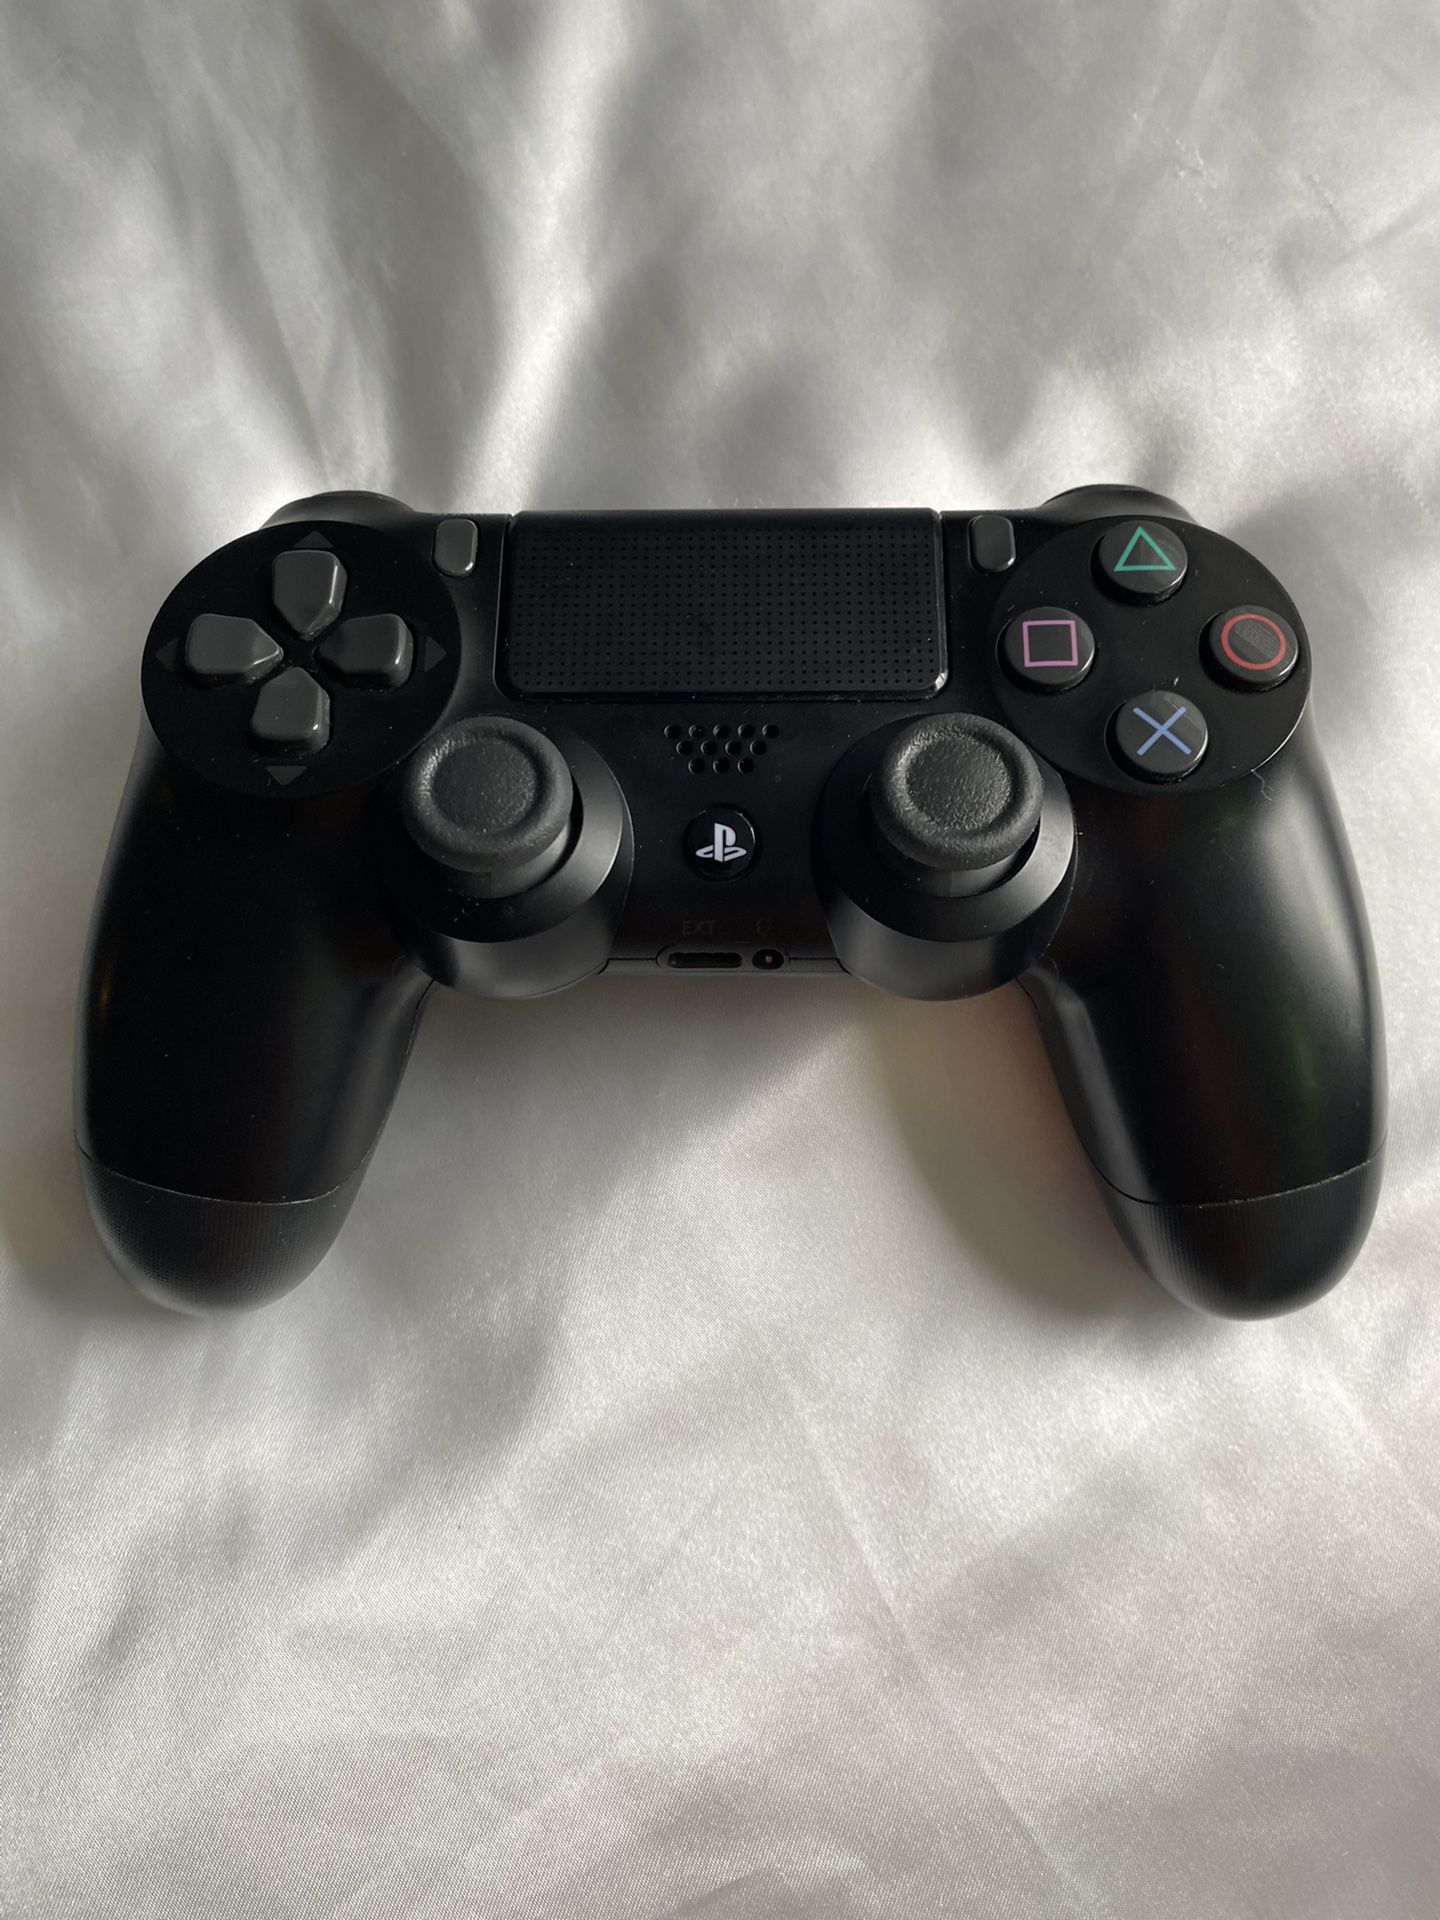 PS4 Slim 1tb - Two DualShock Controllers - Call Of Duty